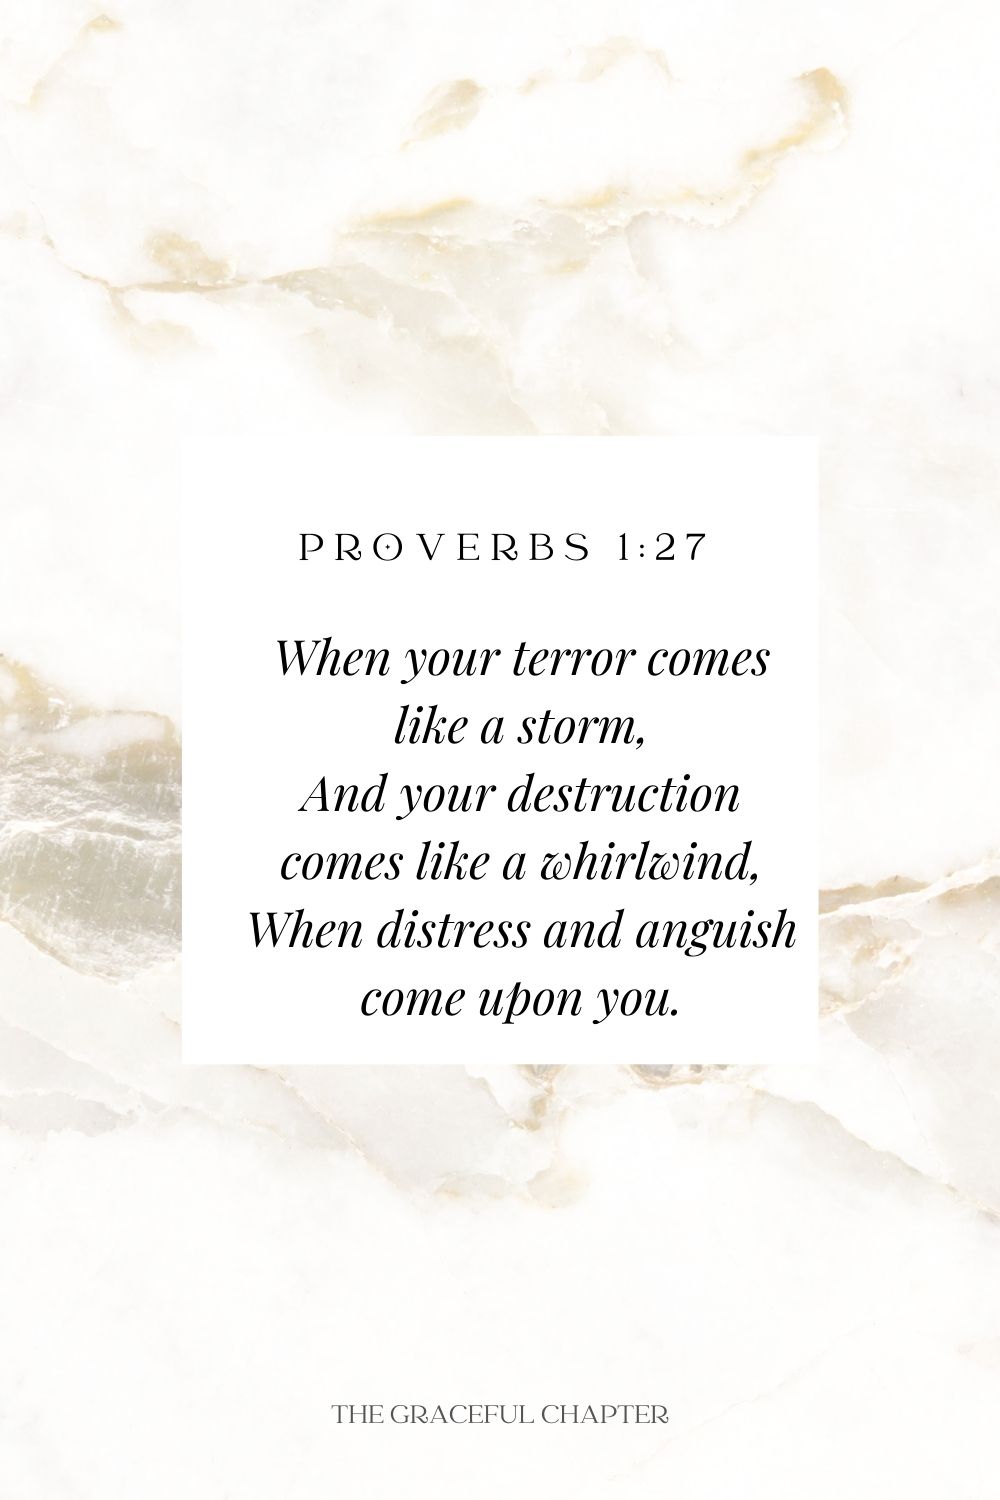 When your terror comes like a storm, And your destruction comes like a whirlwind, When distress and anguish come upon you. Proverbs 1:27